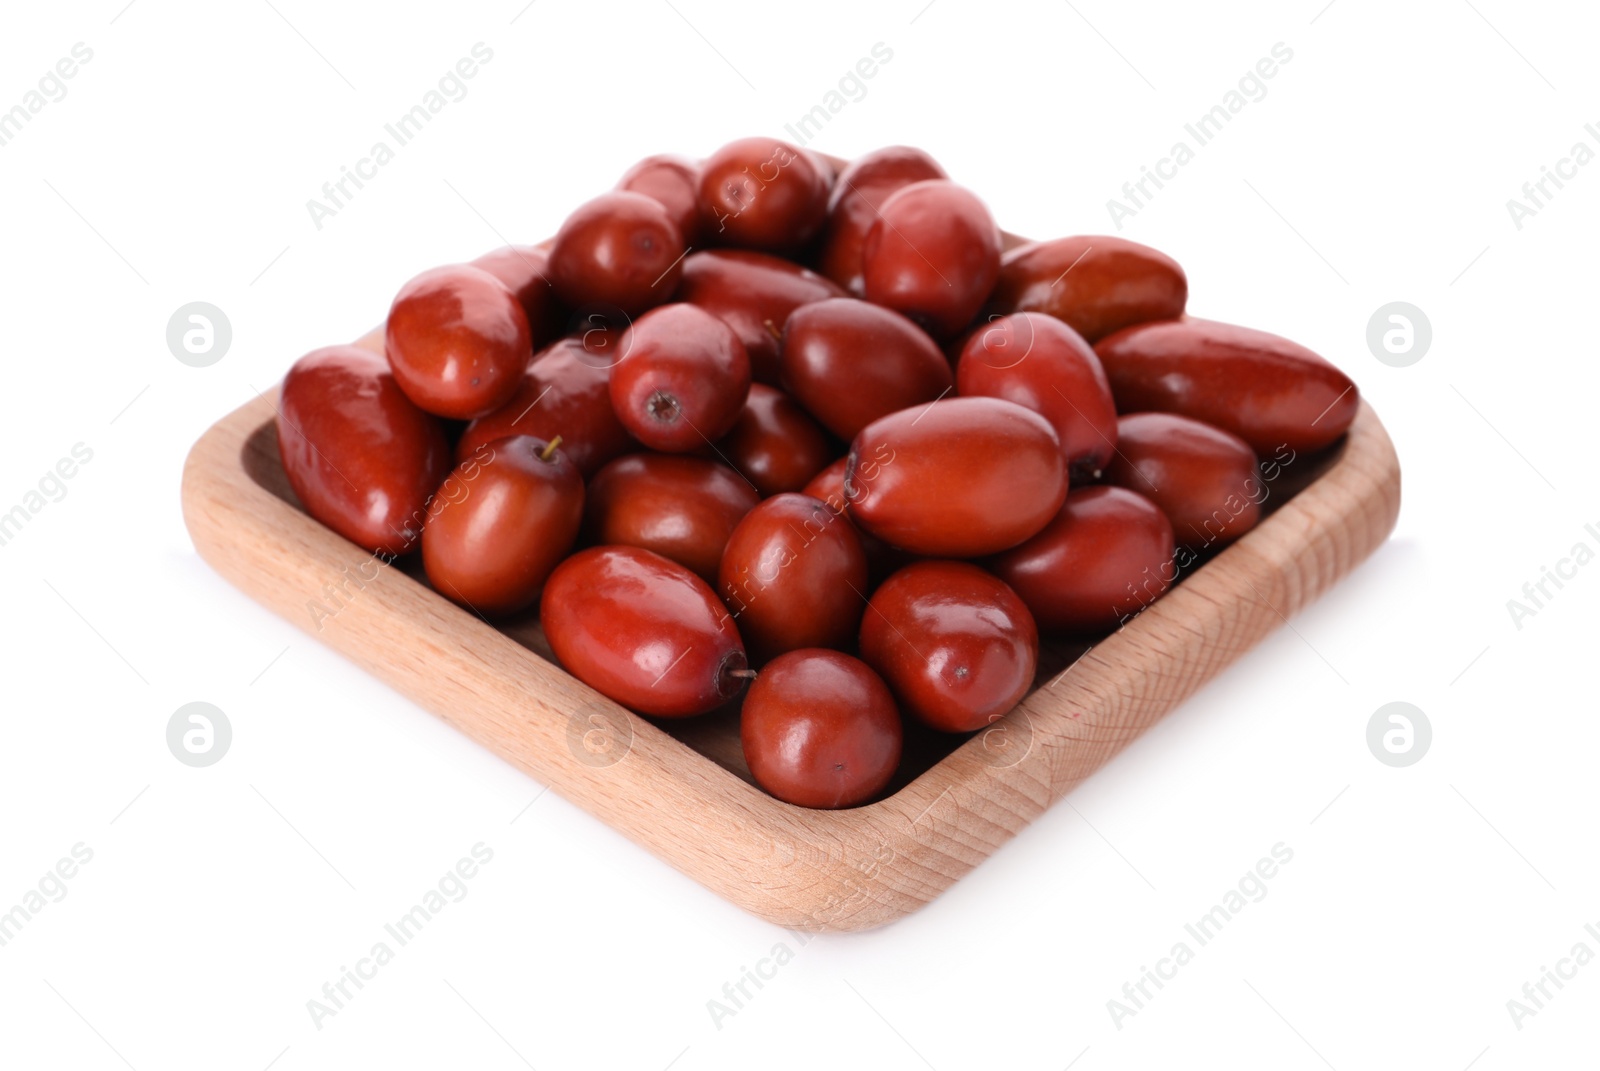 Photo of Wooden plate of ripe red dates on white background